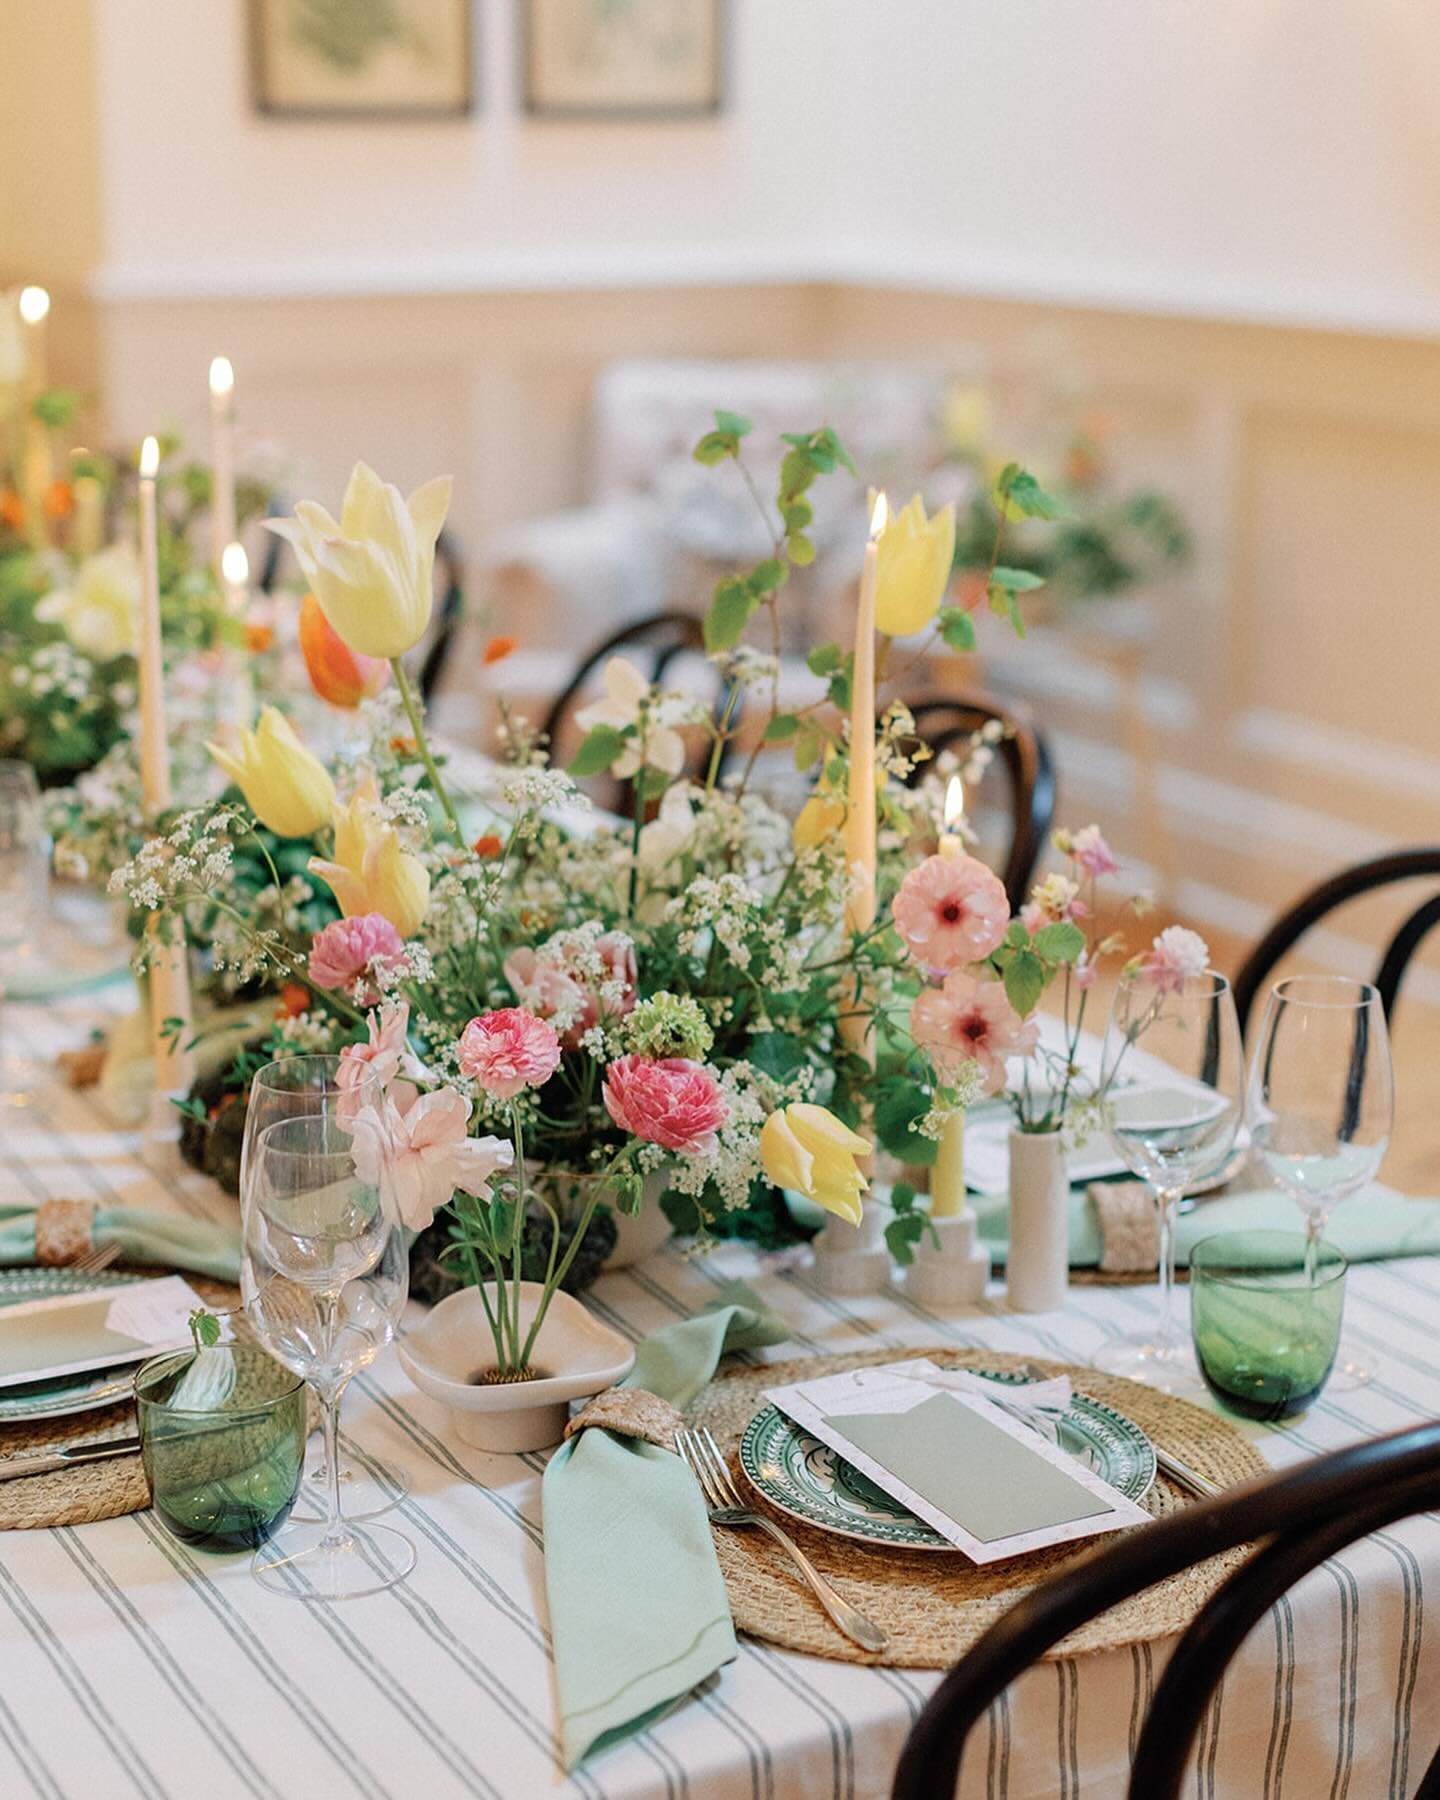 A fresh &amp; delicate Spring tablescape 💛

An organic display of British florals scattering the table, accompanied by seasonal veggies! 🥬

With stems grown by us, including tulips, geums, butterfly ranunculus. Topped up by beautiful flowers locall